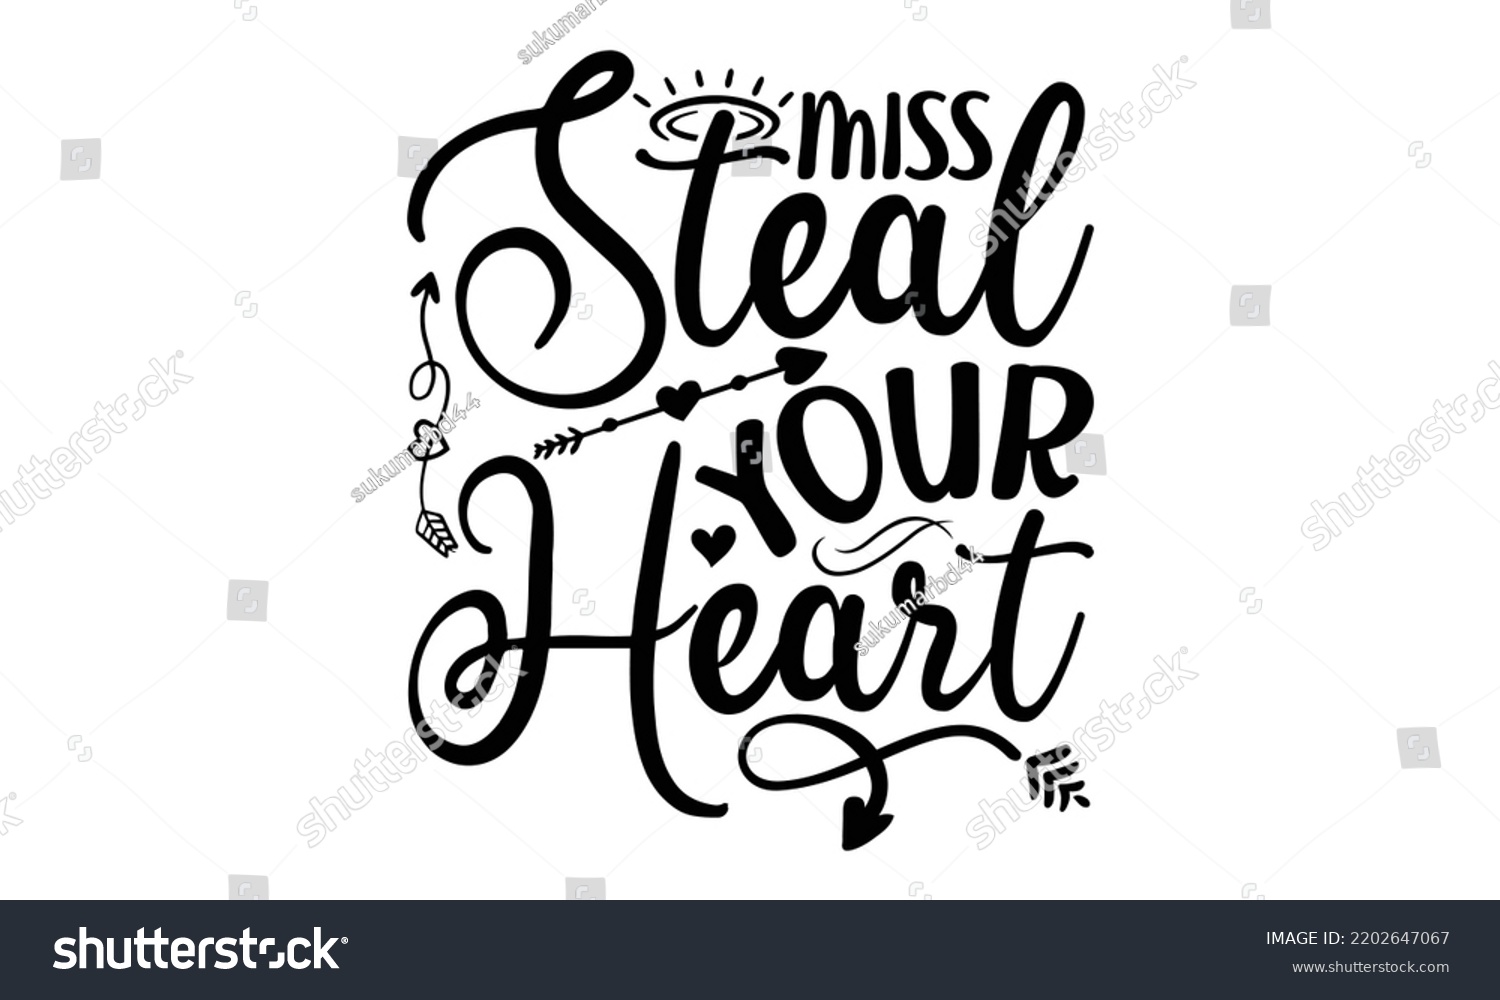 SVG of Miss Steal Your Heart - Valentine's Day 2023 quotes svg design, Hand drawn vintage hand lettering, This illustration can be used as a print on t-shirts and bags, stationary or as a poster. svg